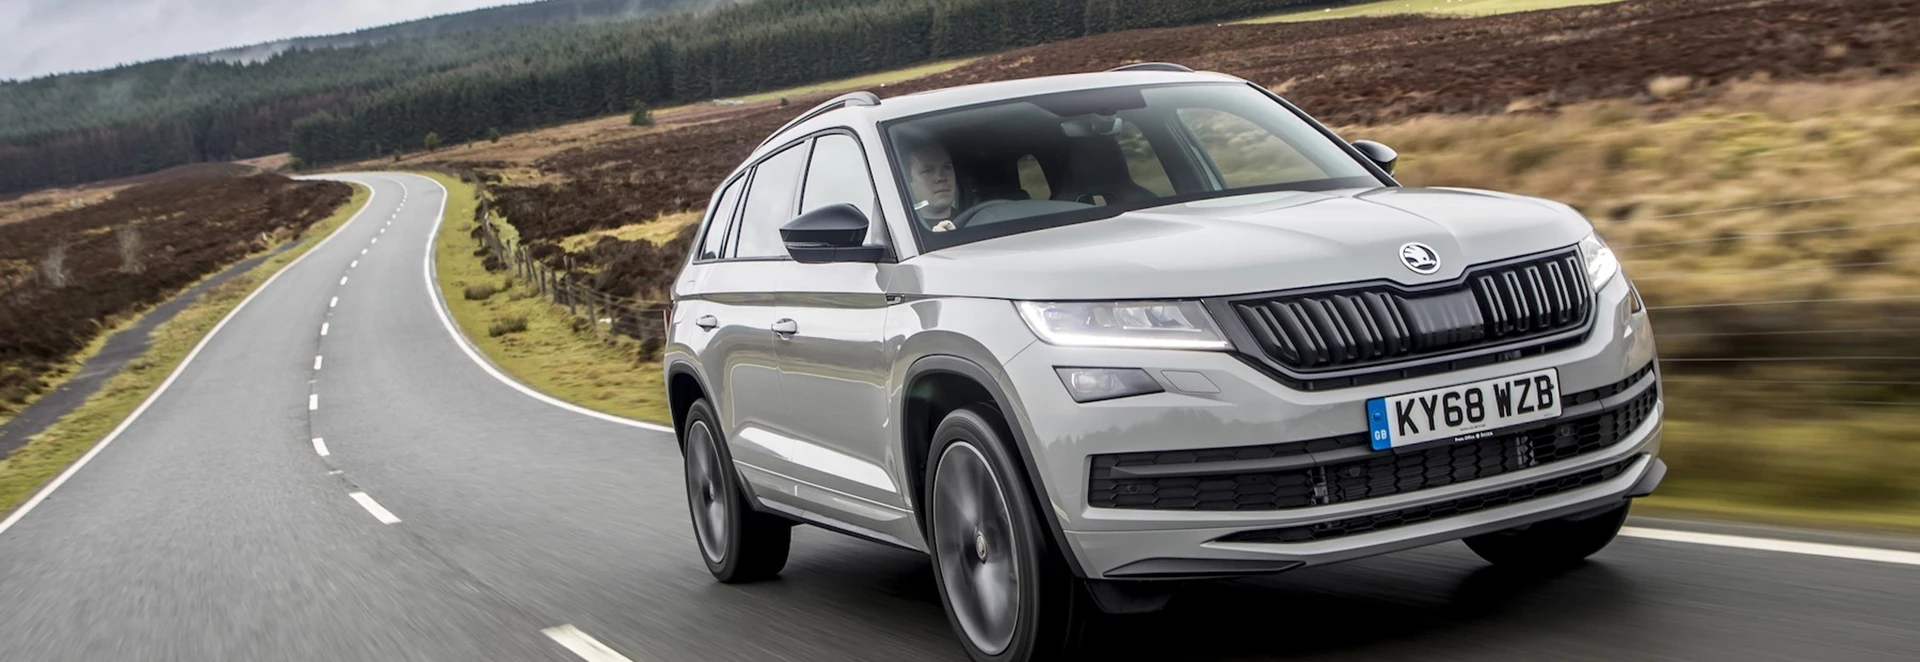 Best SUVs for under £30,000 in 2020